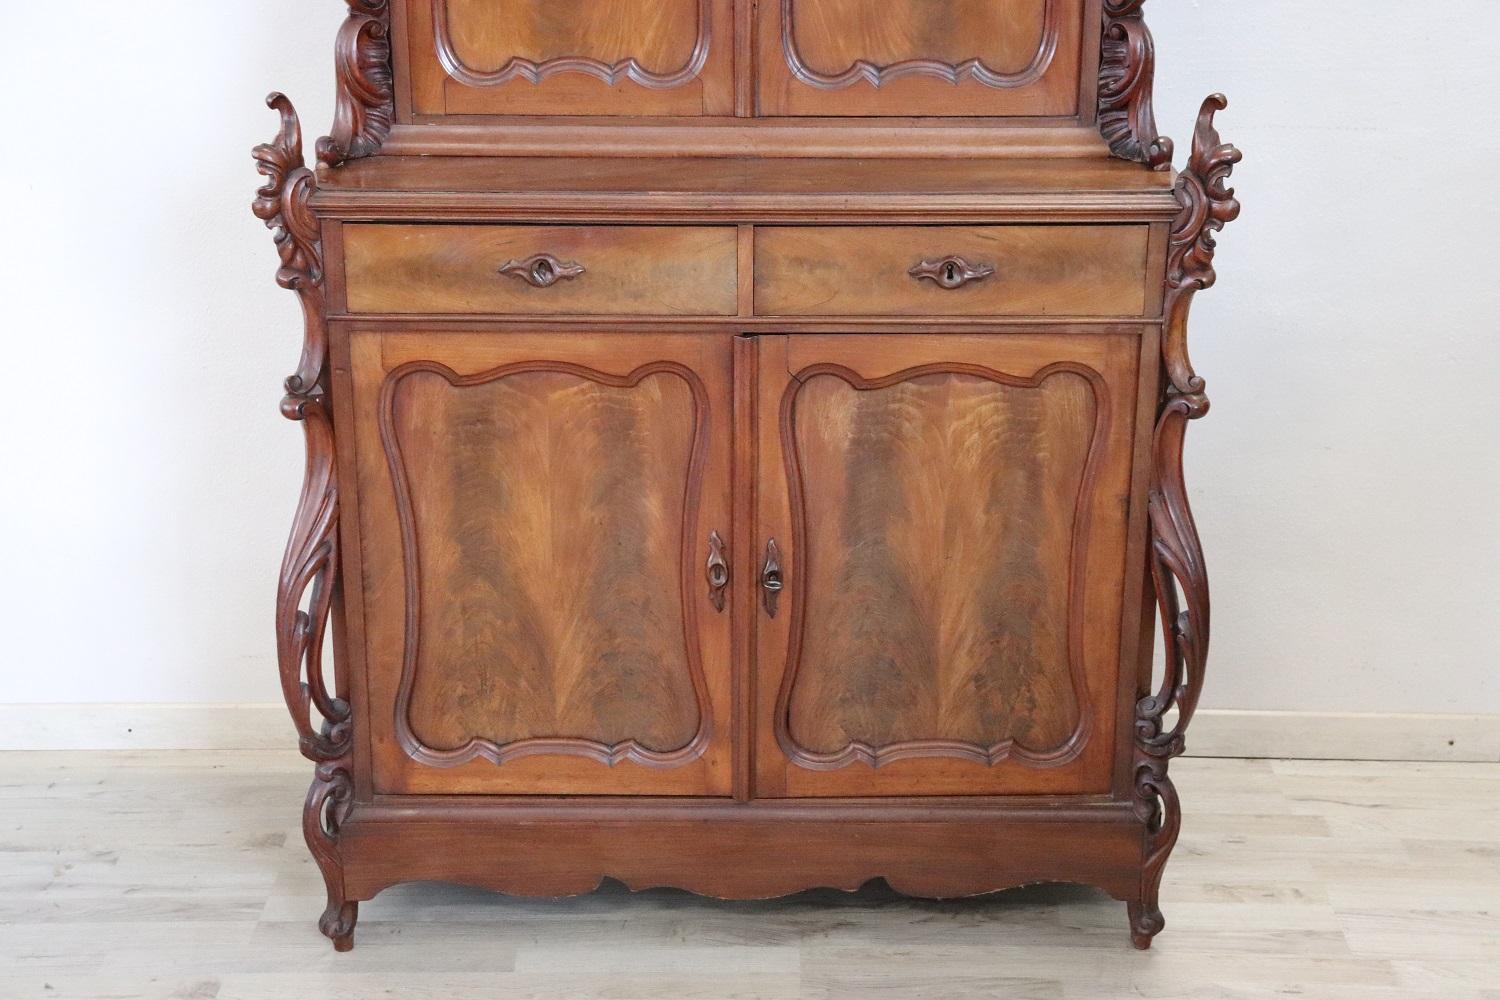 Beautiful art nouveau sideboard in solid mahogany wood made in 1890s. Beautiful patina of wood. Characterized by a refined decoration move with curls and scrolls carved in the wood. The sideboard expresses all the characteristics of the Art nouveau